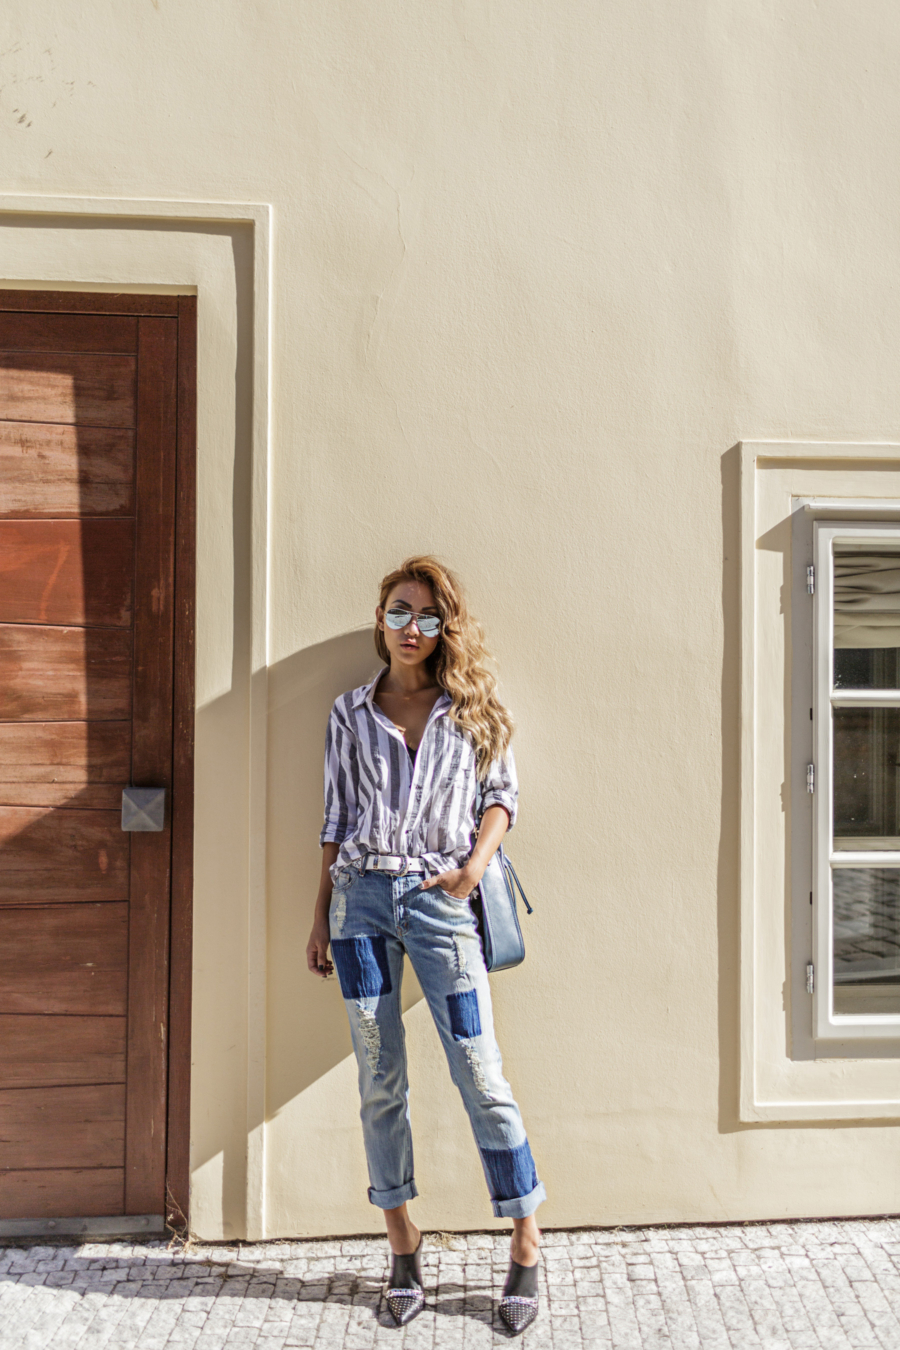 Stripe shirts and patch work denim - Off Duty Style Outfits Cool Girls Swear By // NotJessFashion.com